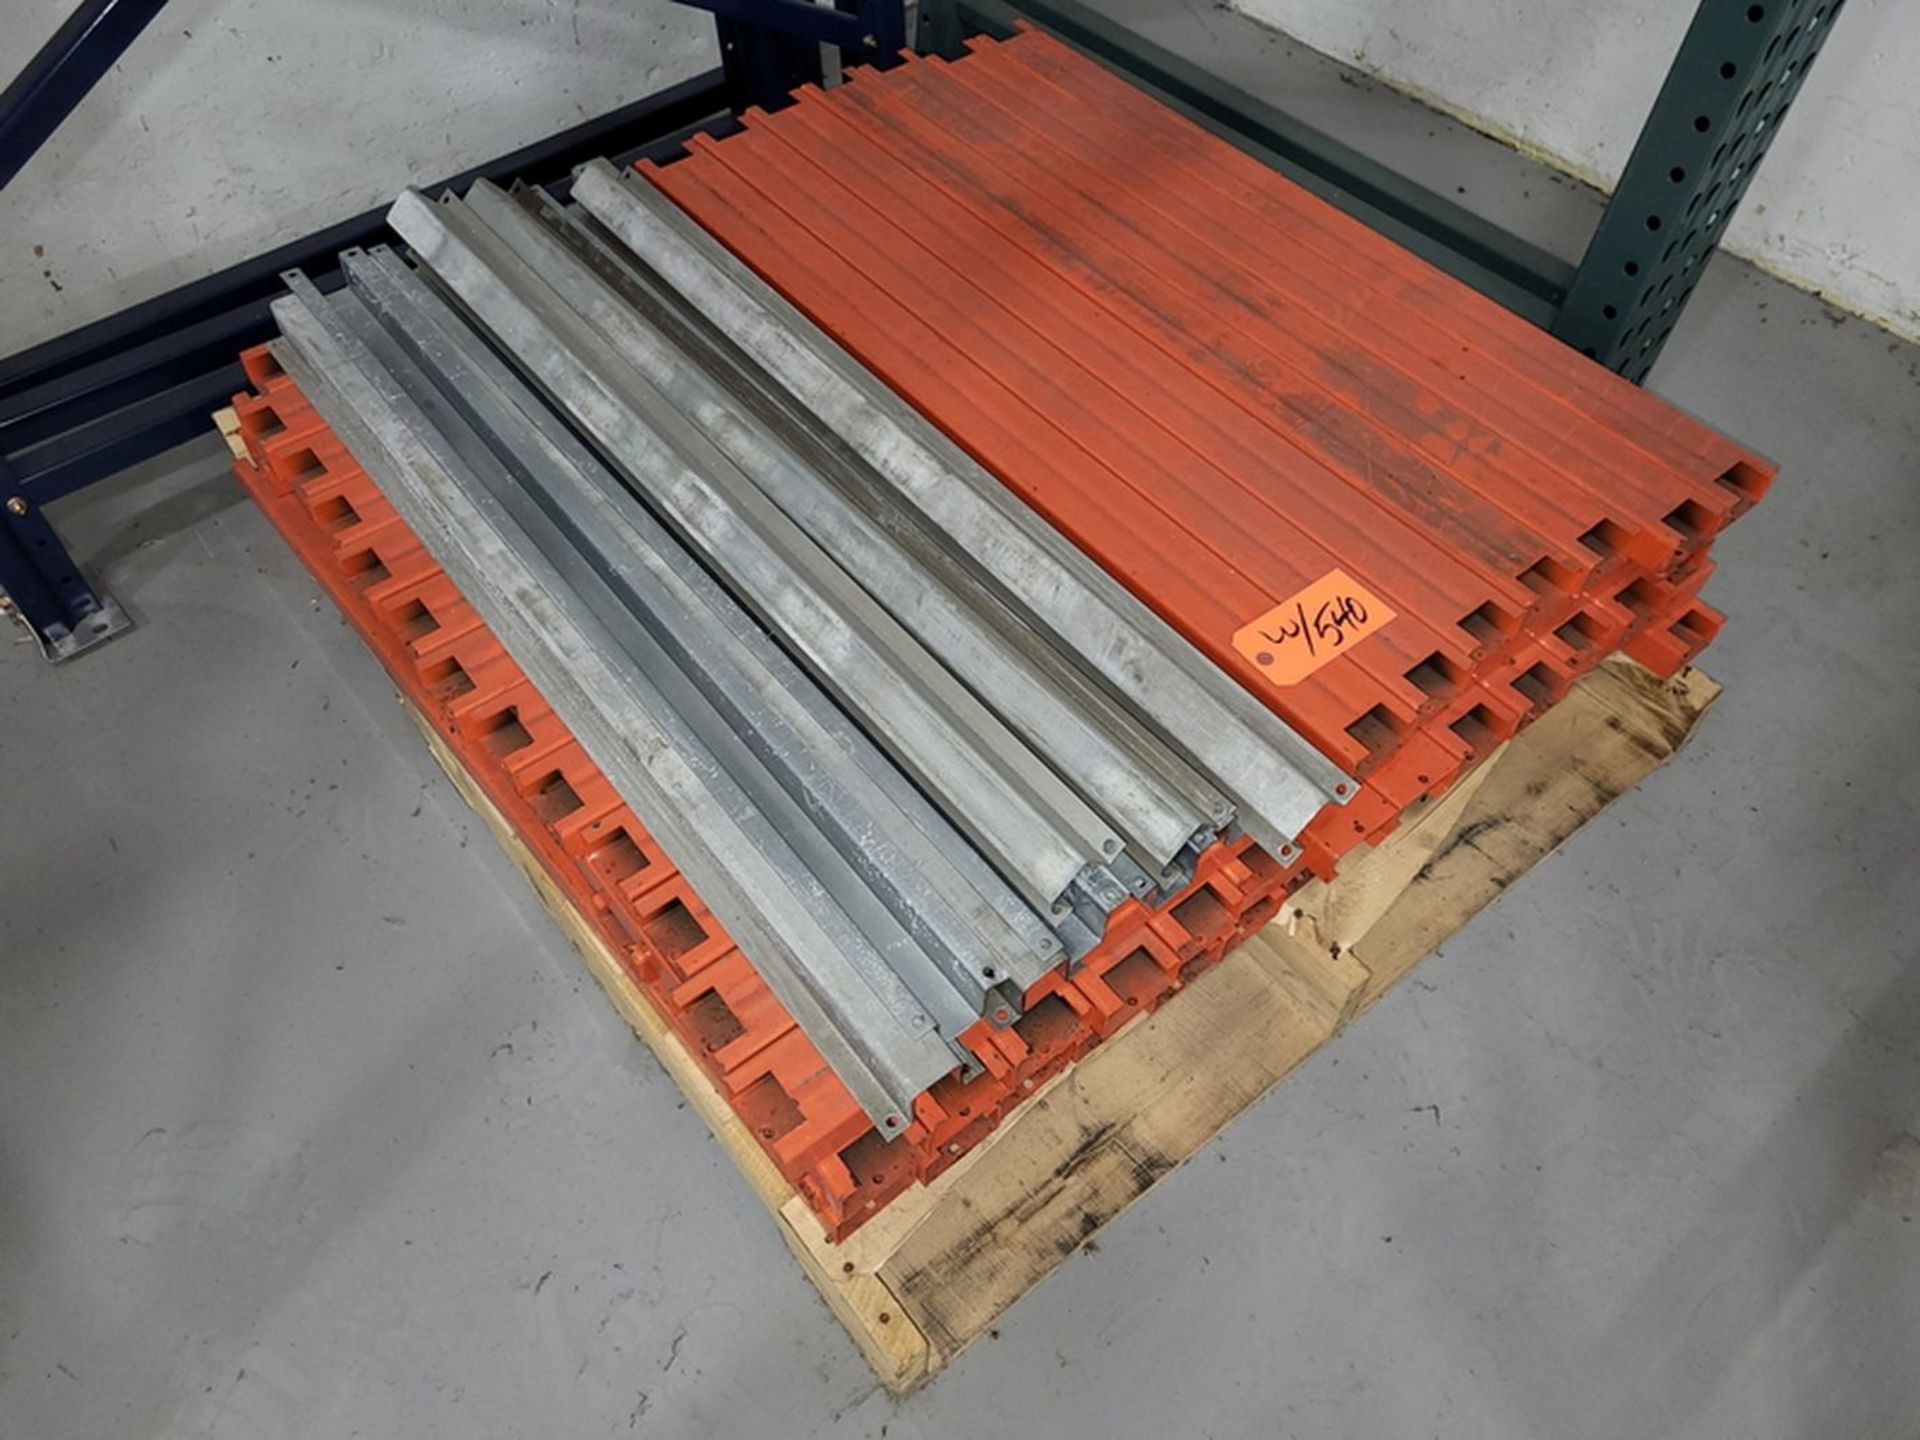 Lot - (15) Sections of Heavy Duty Adjustable Pallet Racking; 8 ft. wide x 42 in. deep x 22 ft. - Image 3 of 4